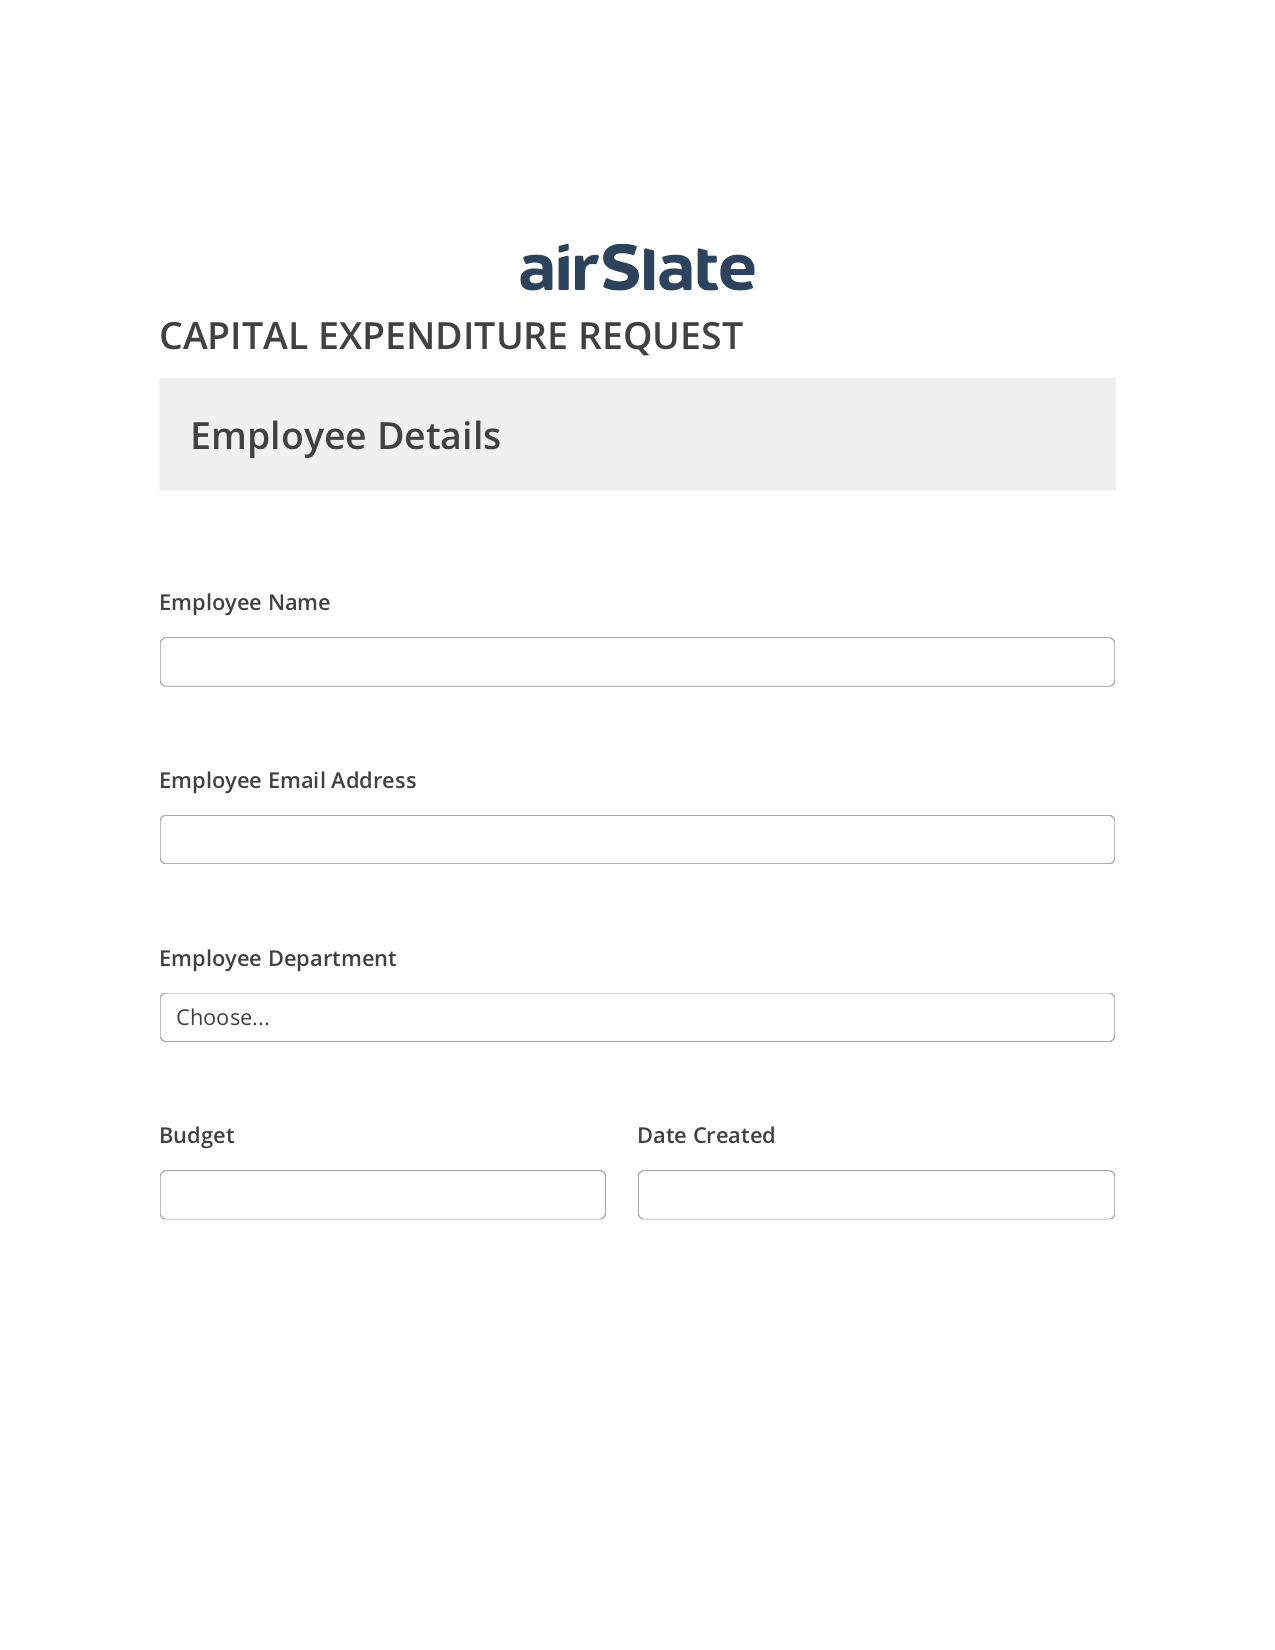 Capital Expenditure Request Approval Workflow Pre-fill from Google Sheet Dropdown Options Bot, Send a Slate to Salesforce Contact Bot, Archive to Dropbox Bot